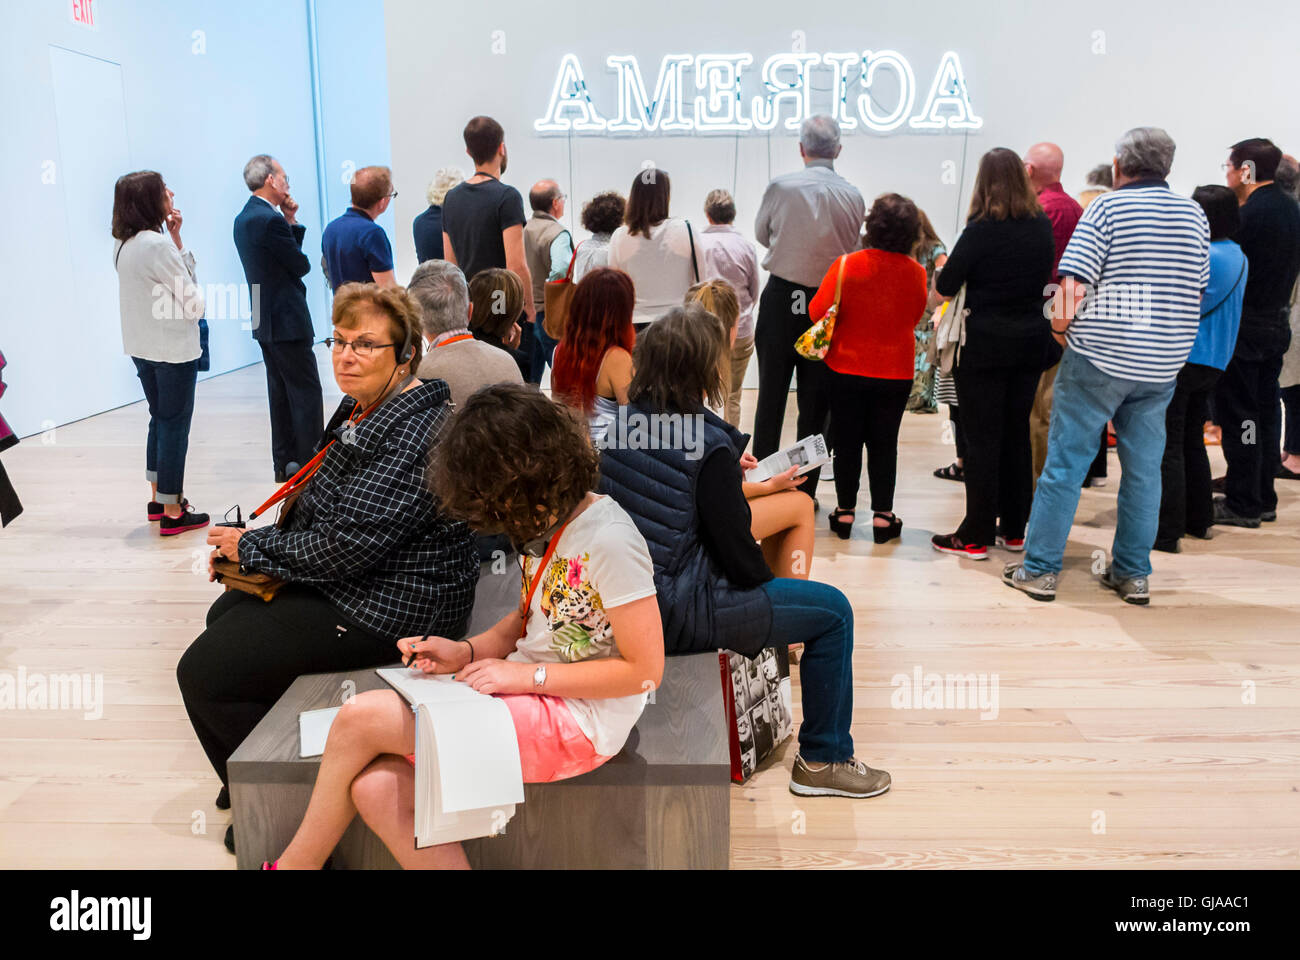 New York City, NY, USA, Crowd of Tourists Listening to Tour Guide in Modern American Art Gallery, Downtown Whitney Museum, in Meat Packing District Neighborhood, Neon Light Sculpture Stock Photo